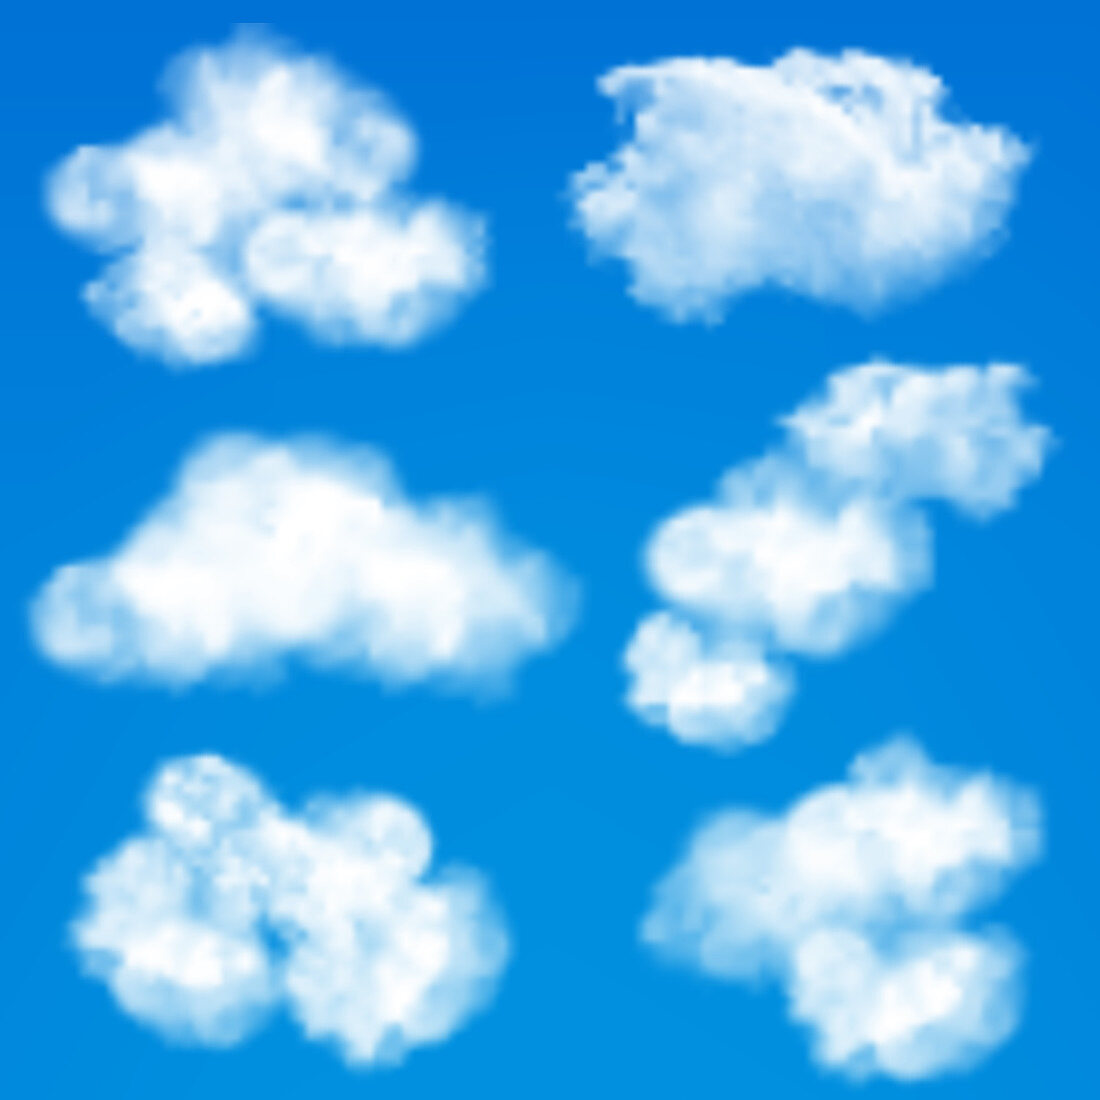 Sky with clouds, illustration